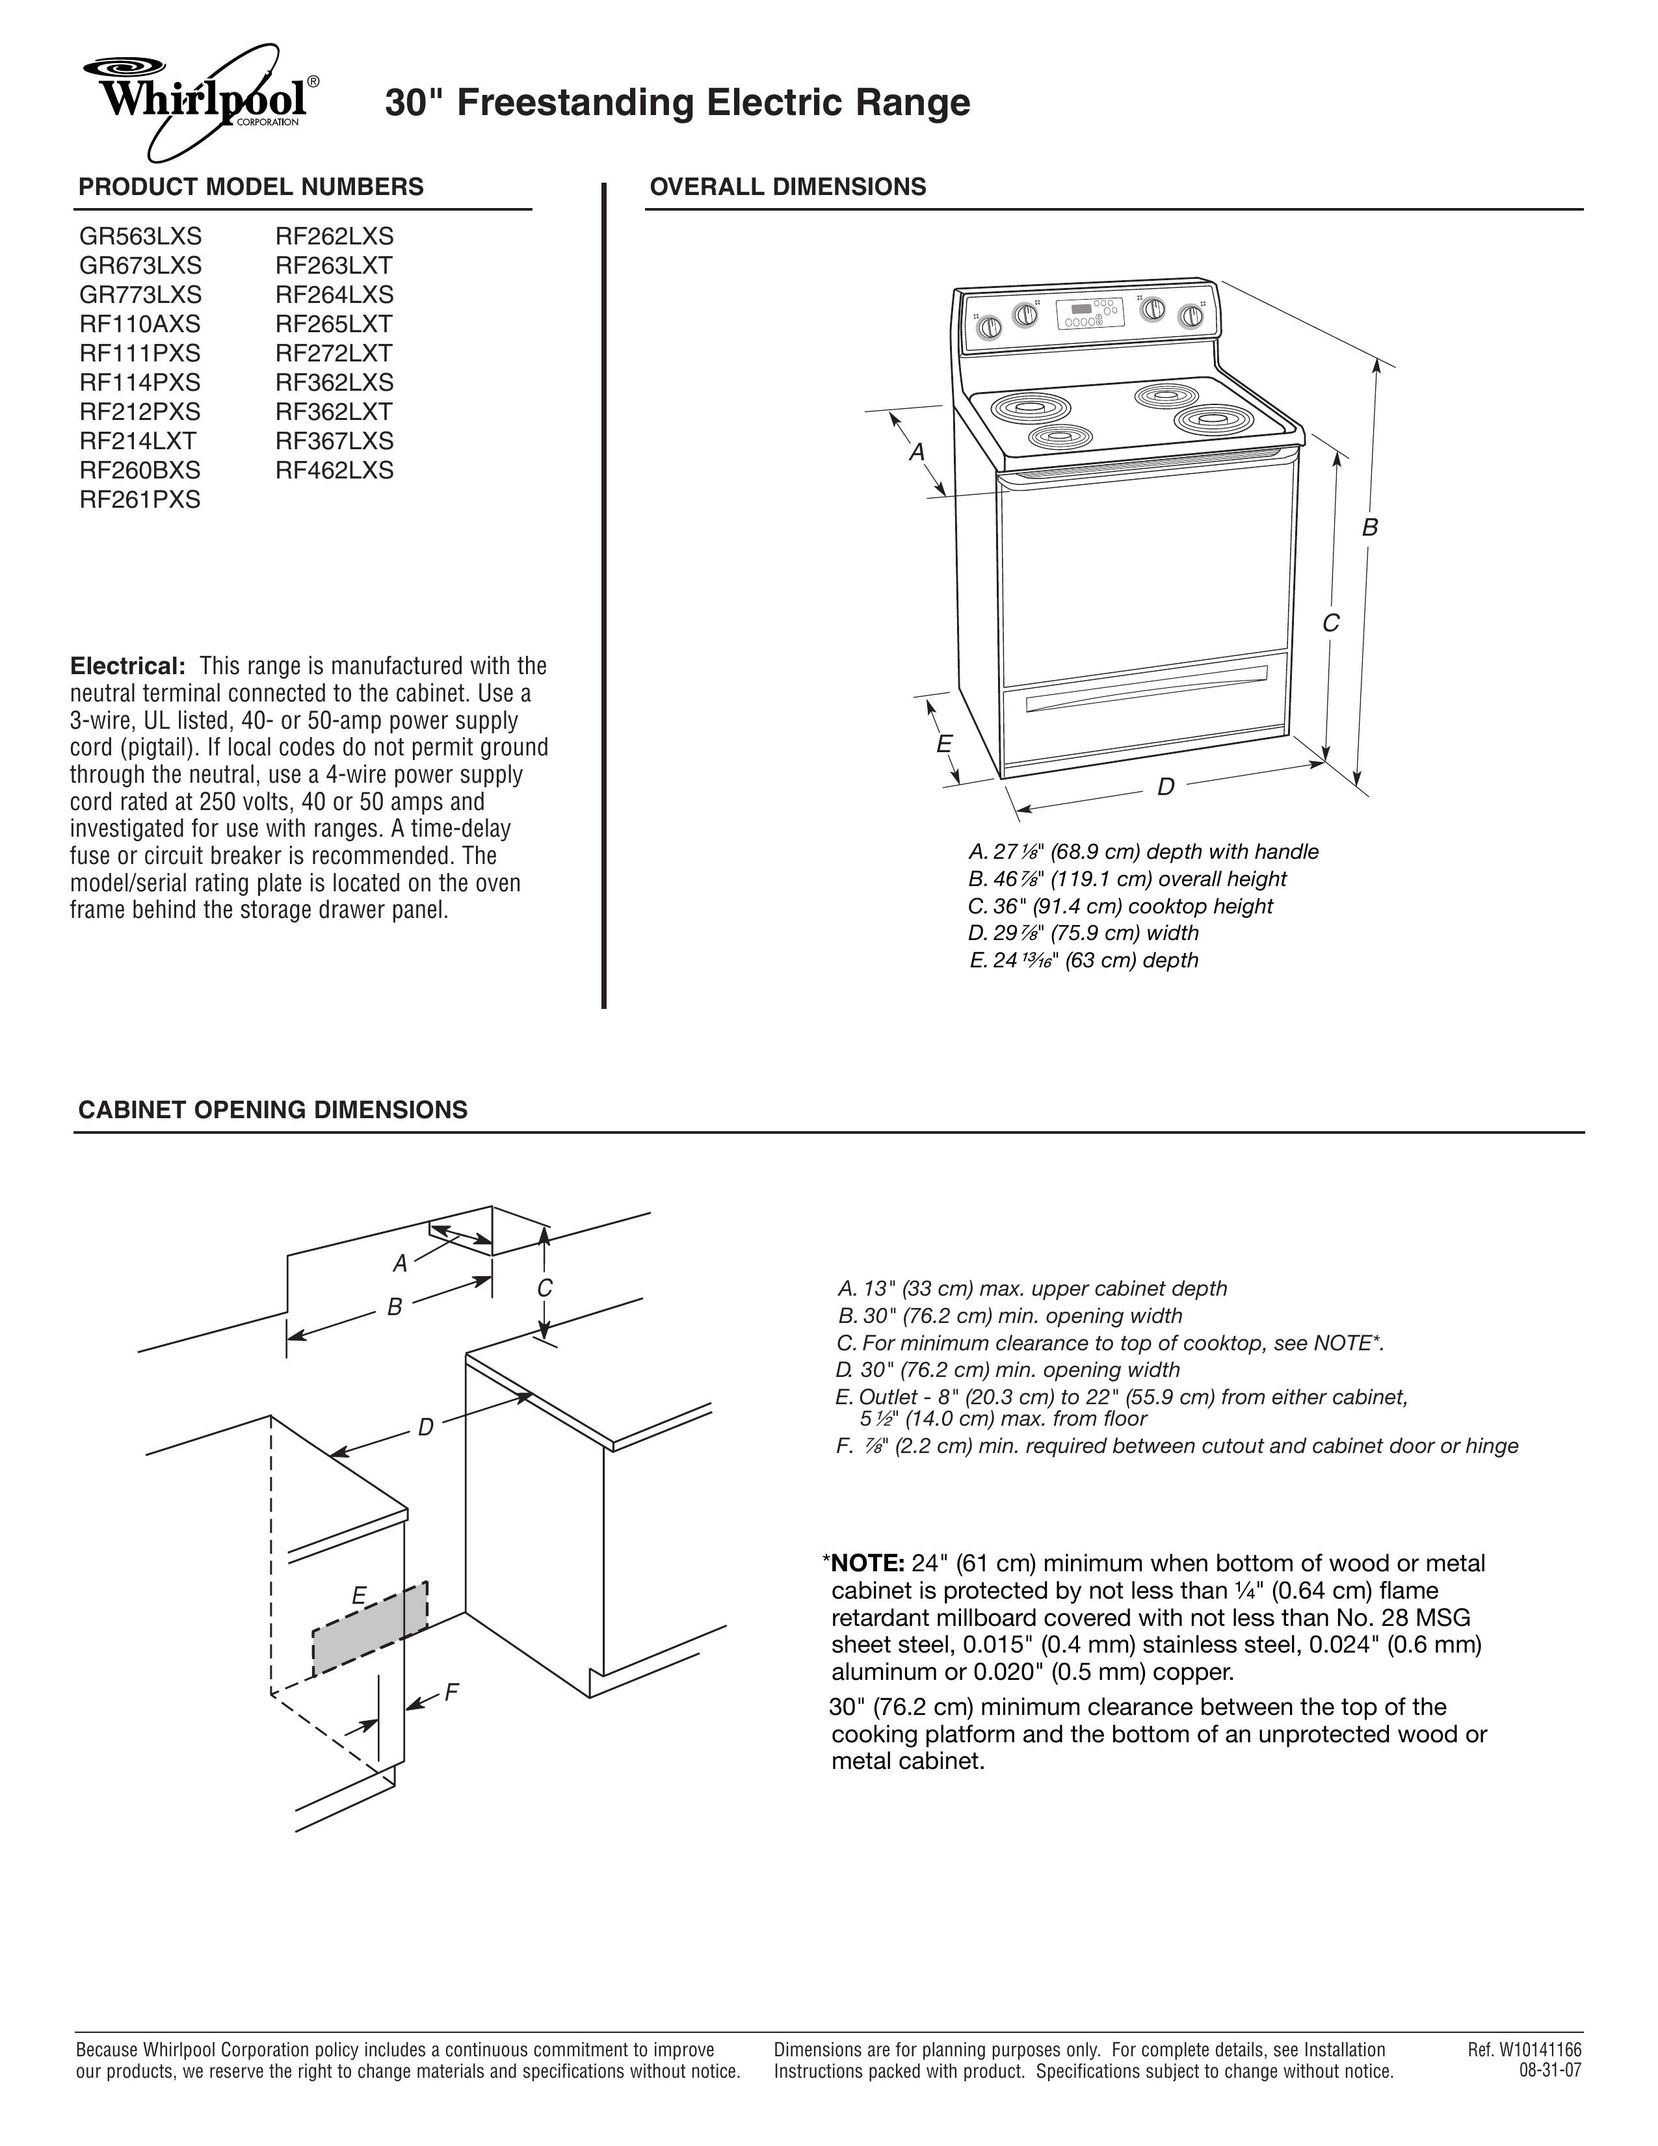 Whirlpool GR563LXS Computer Monitor User Manual